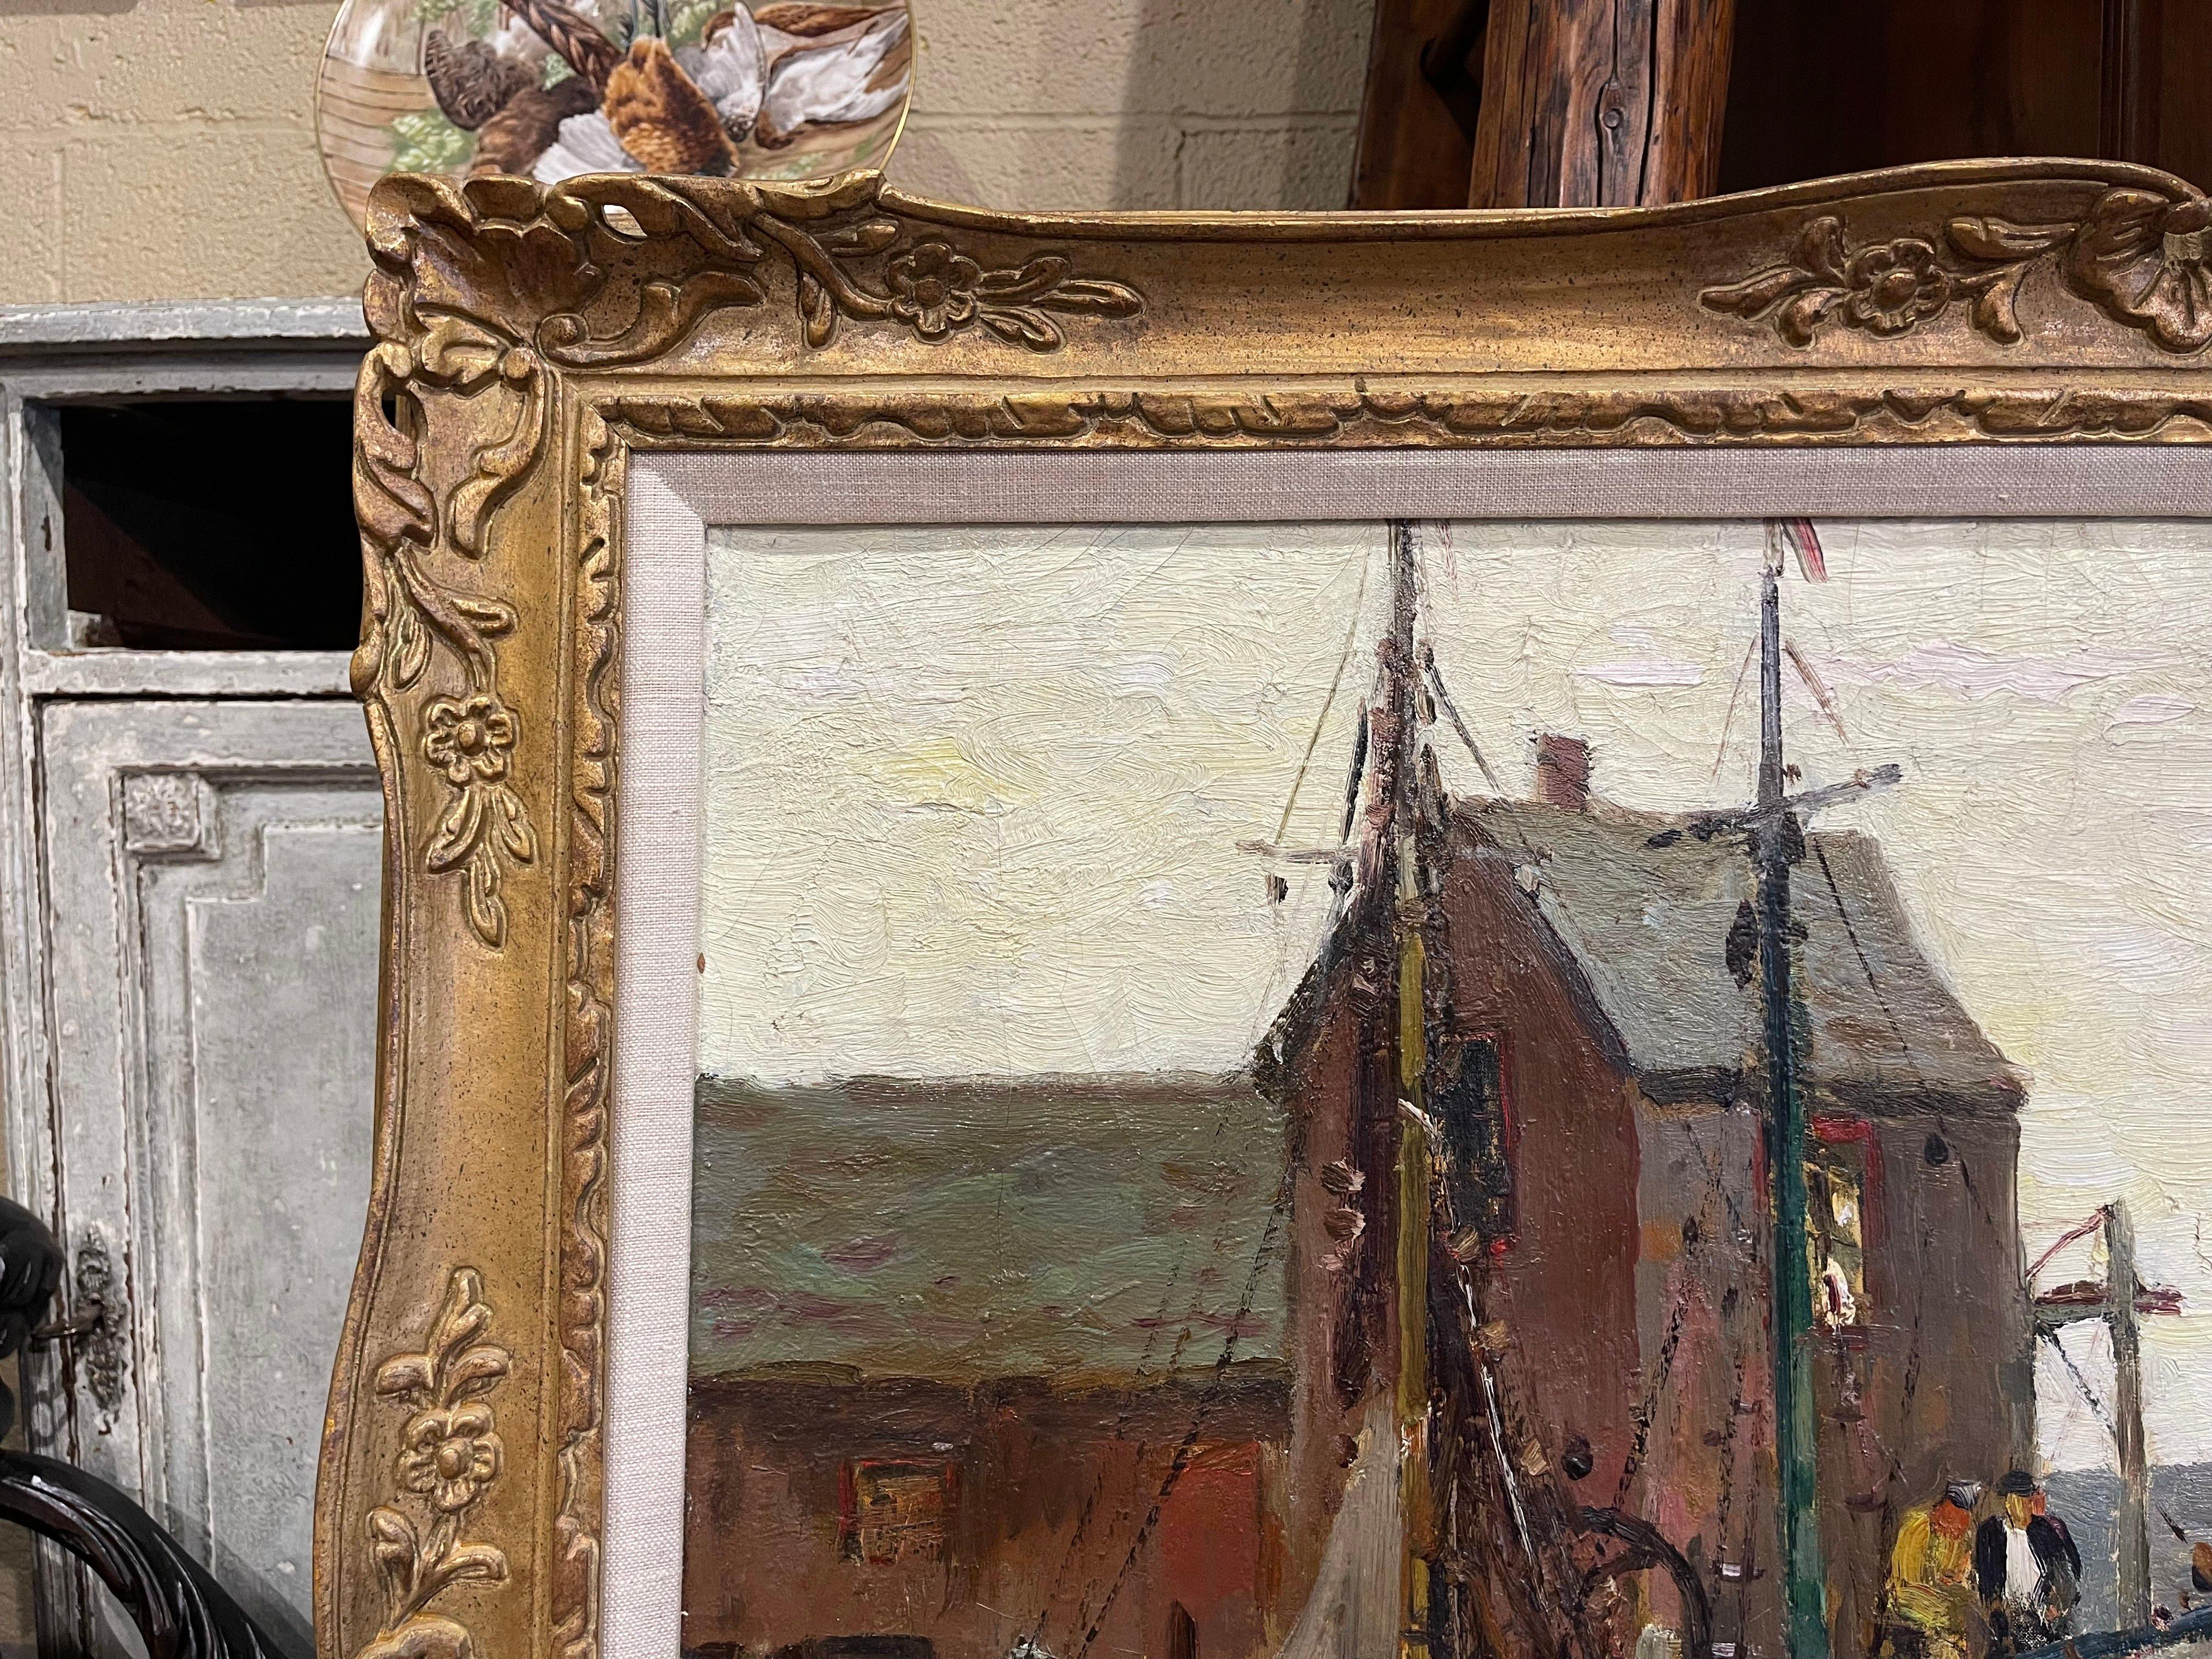 Giltwood Early 20th Century Framed Oil on Canvas Painting “Low Waters” Signed A. Thieme For Sale